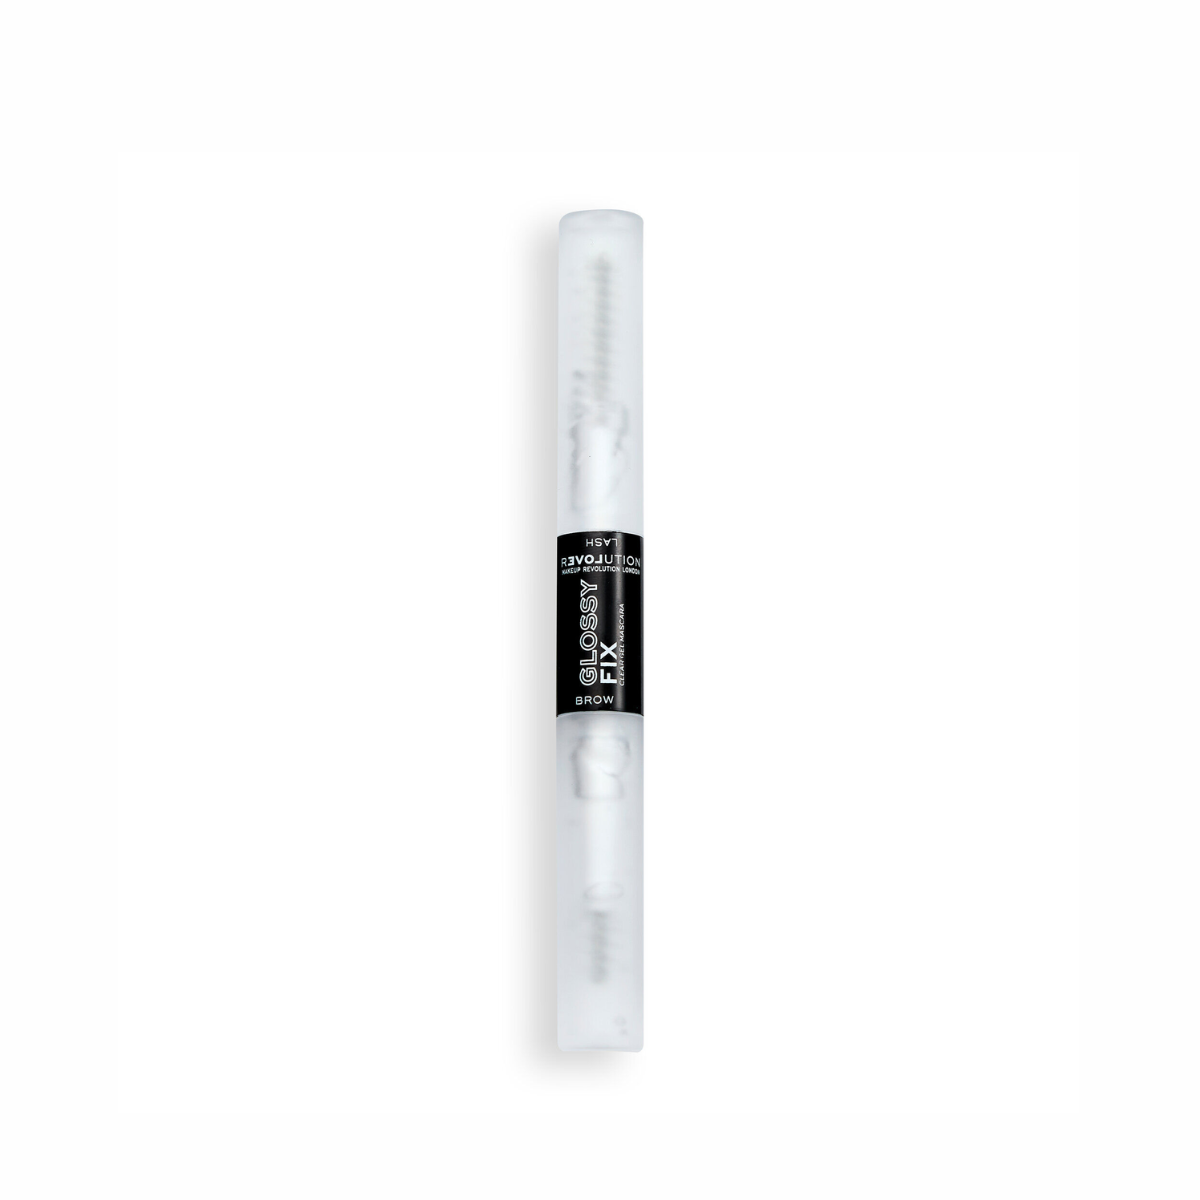 GLOSSY FIX CLEAR BROW GEL AND MASCARA - RELOVE